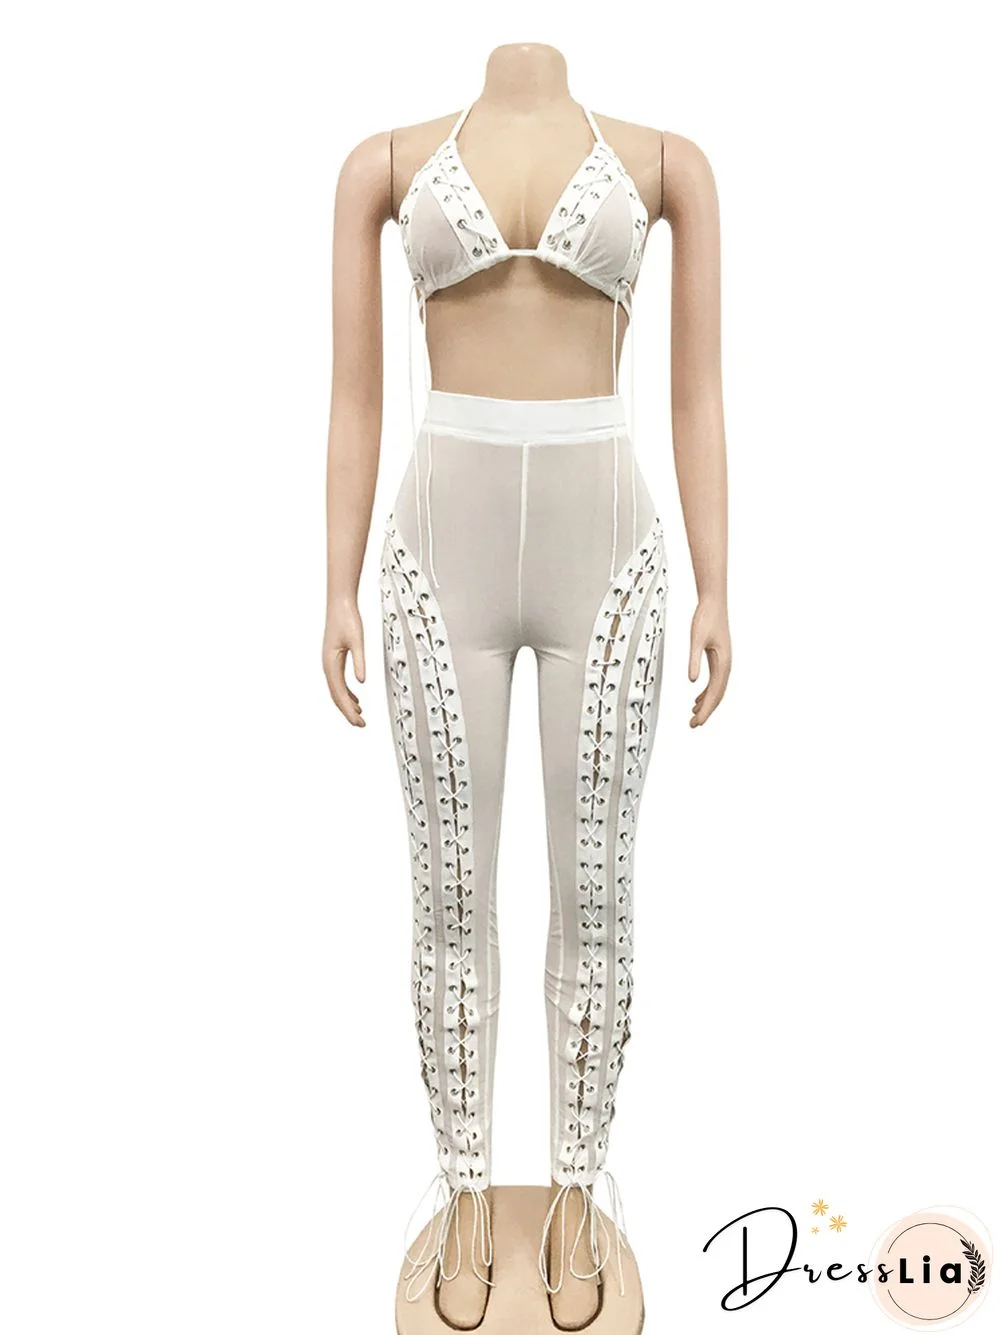 Joskaa Hollow Out Bandage Mesh See Through Bikini TopsAnd Pencil Pants Two Piece Set Woman Summer Sexy Party Club Outfits